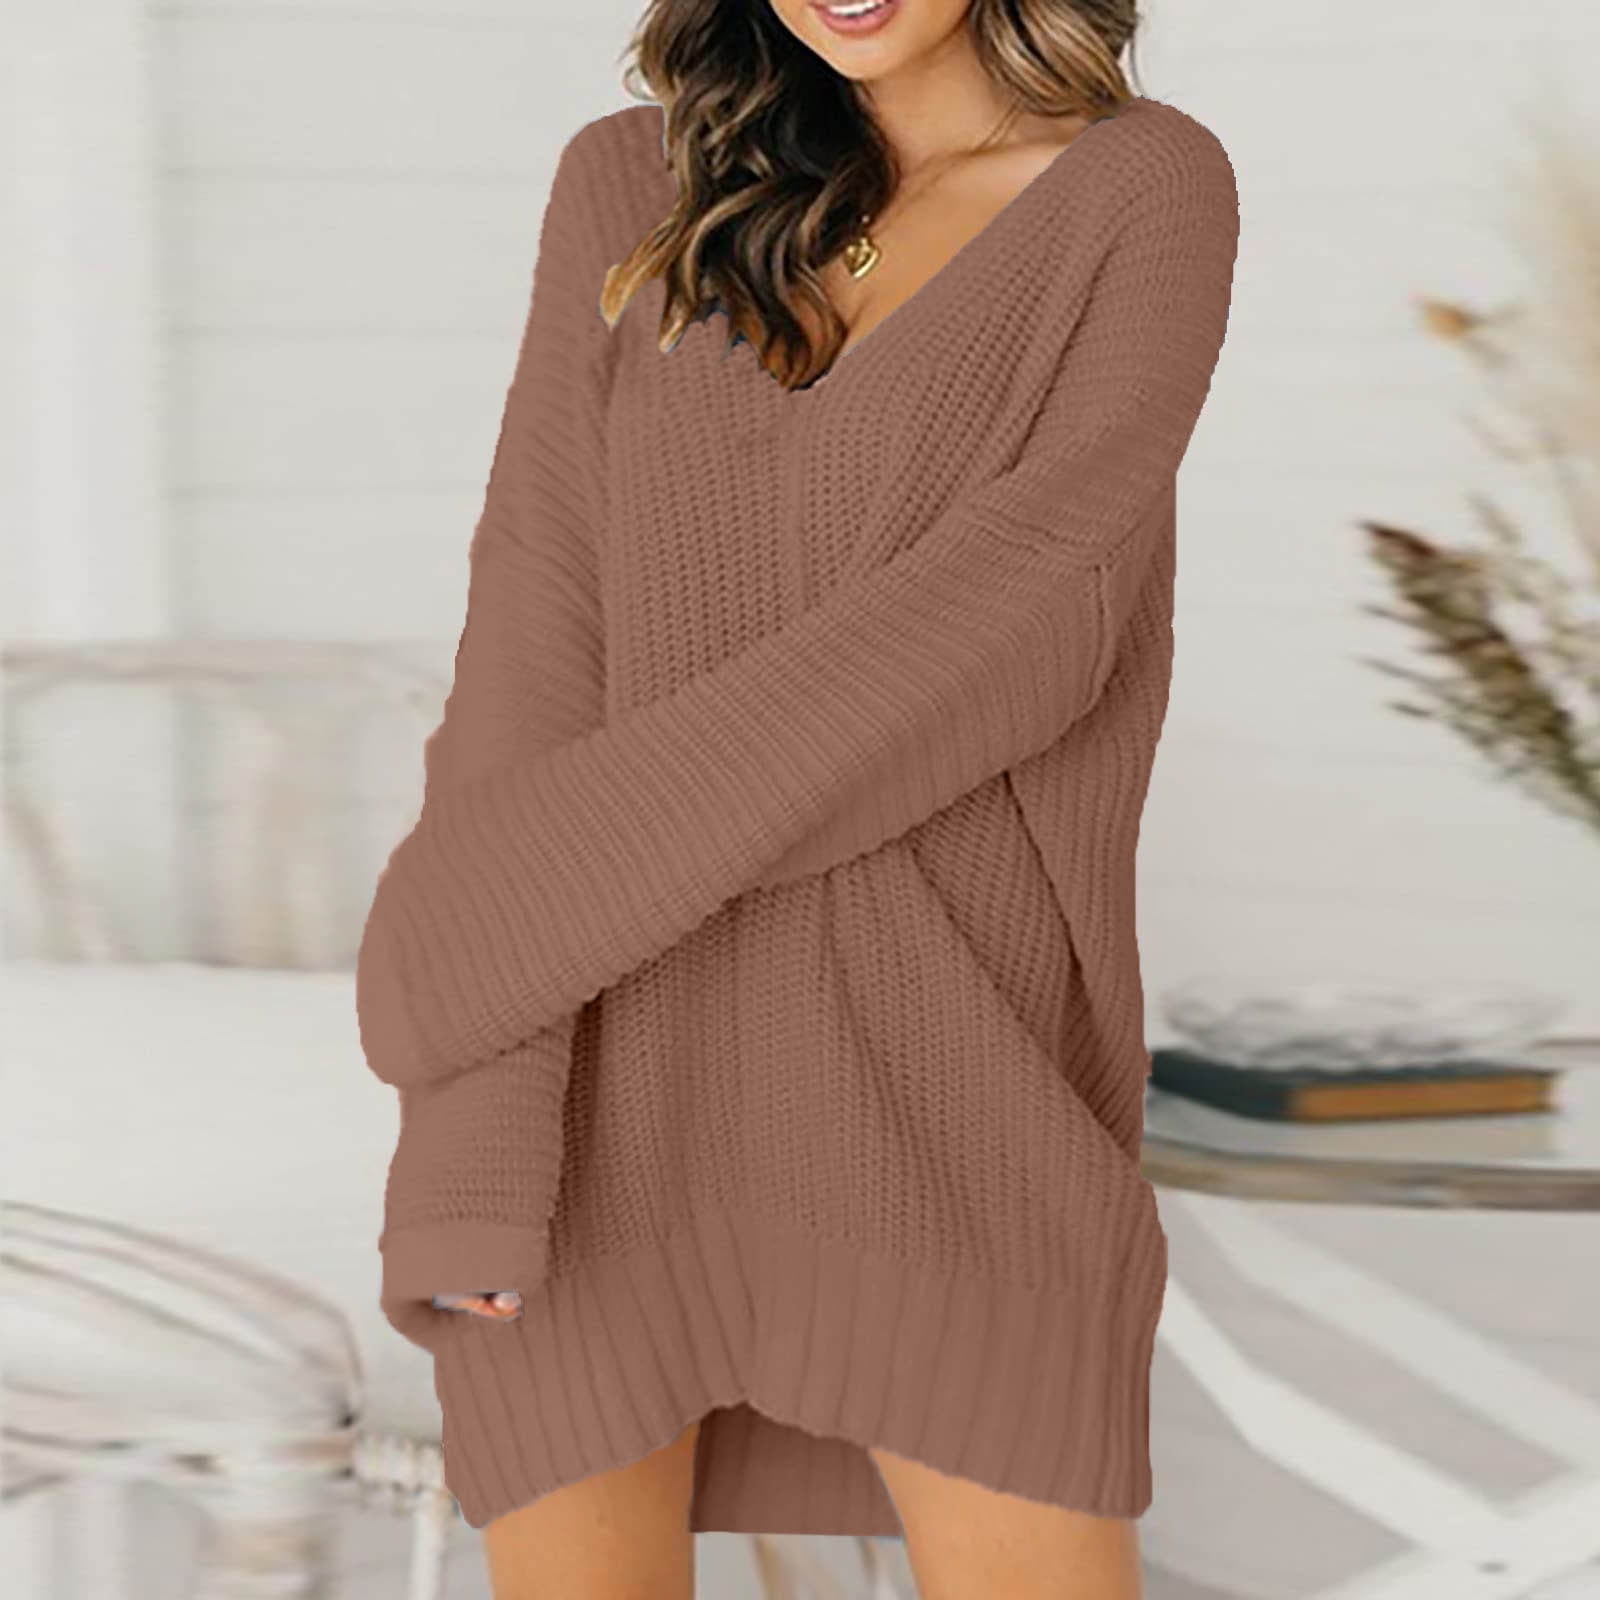 Discover more than 184 ladies sweater dress latest